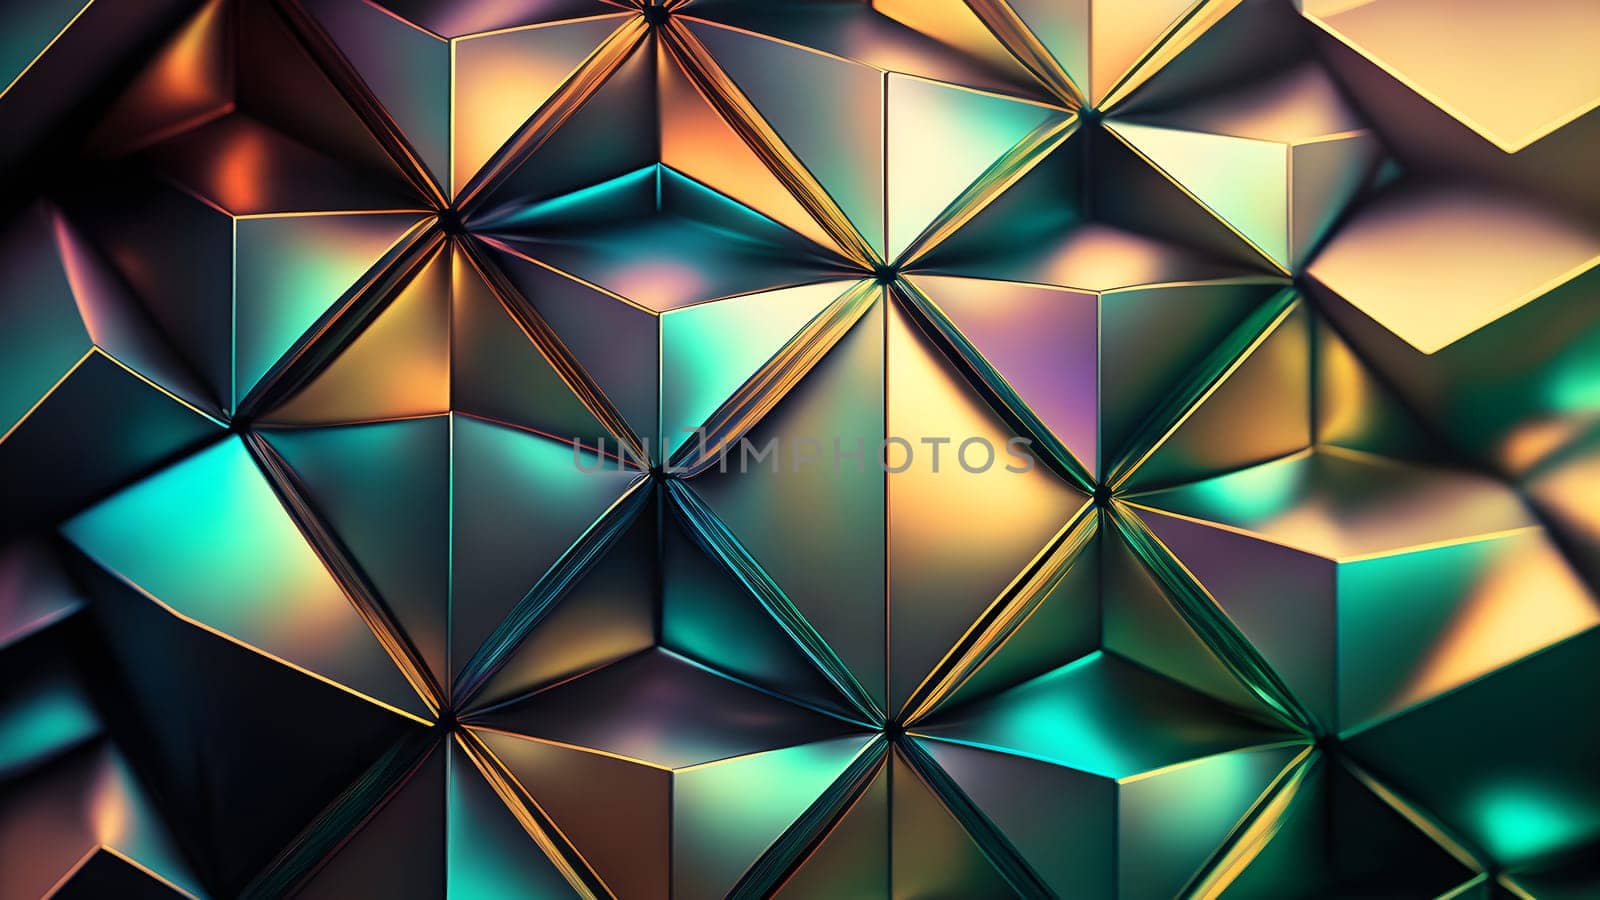 texture and abstract full-frame background of iridescent metal, neural network generated art by z1b